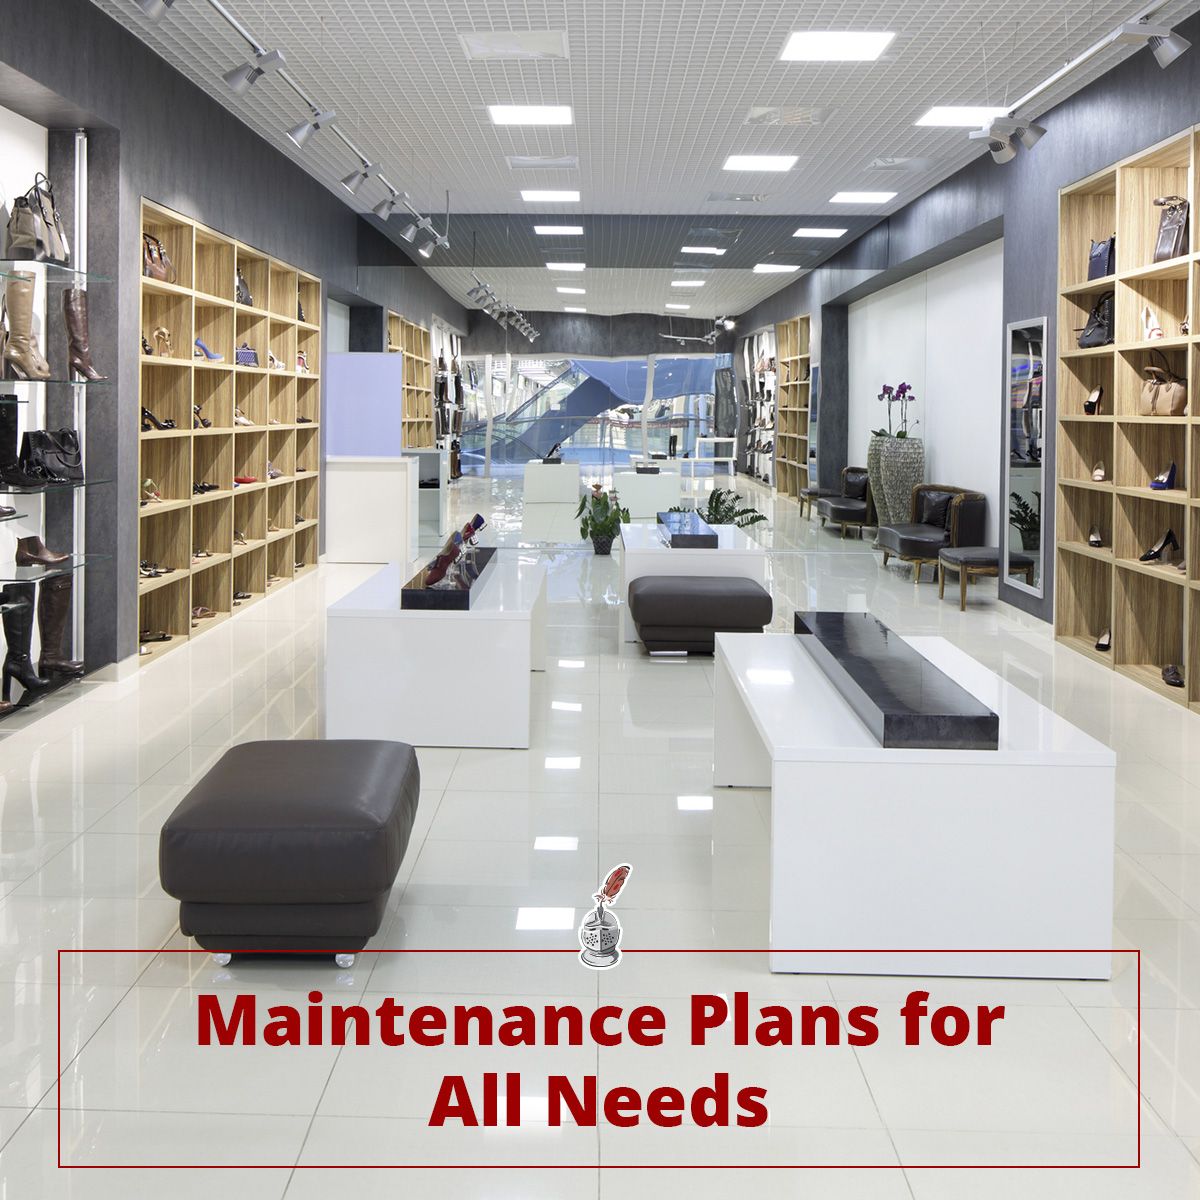 Maintenance Plans for All Needs